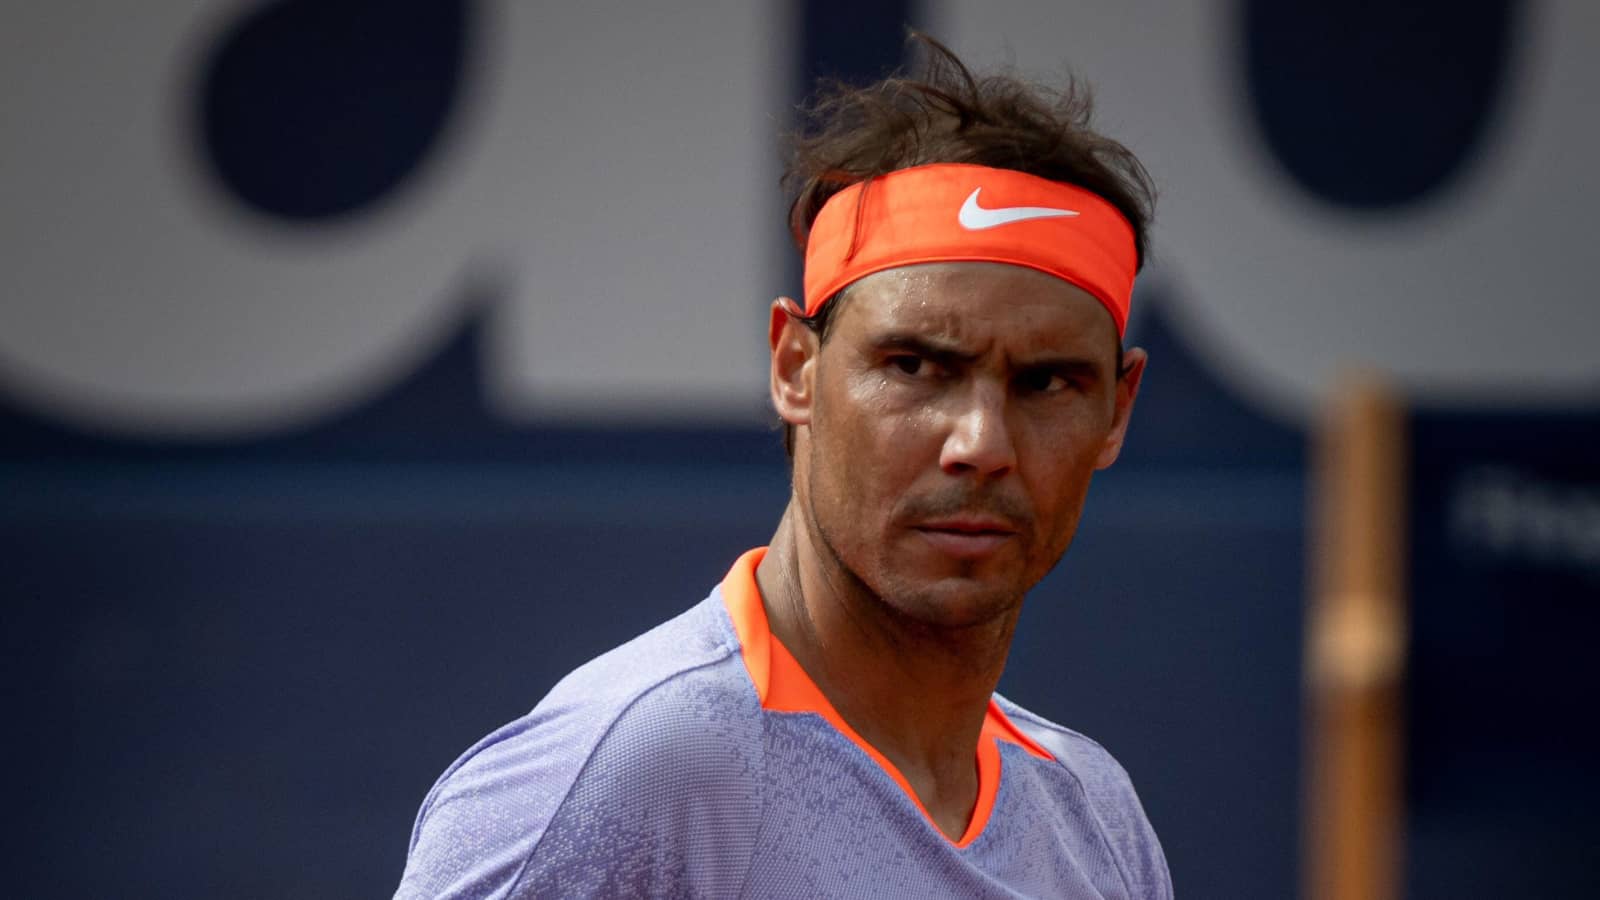 rafael nadal named a ‘floater disruptor’ at the french open – ‘he could play novak in the first round’